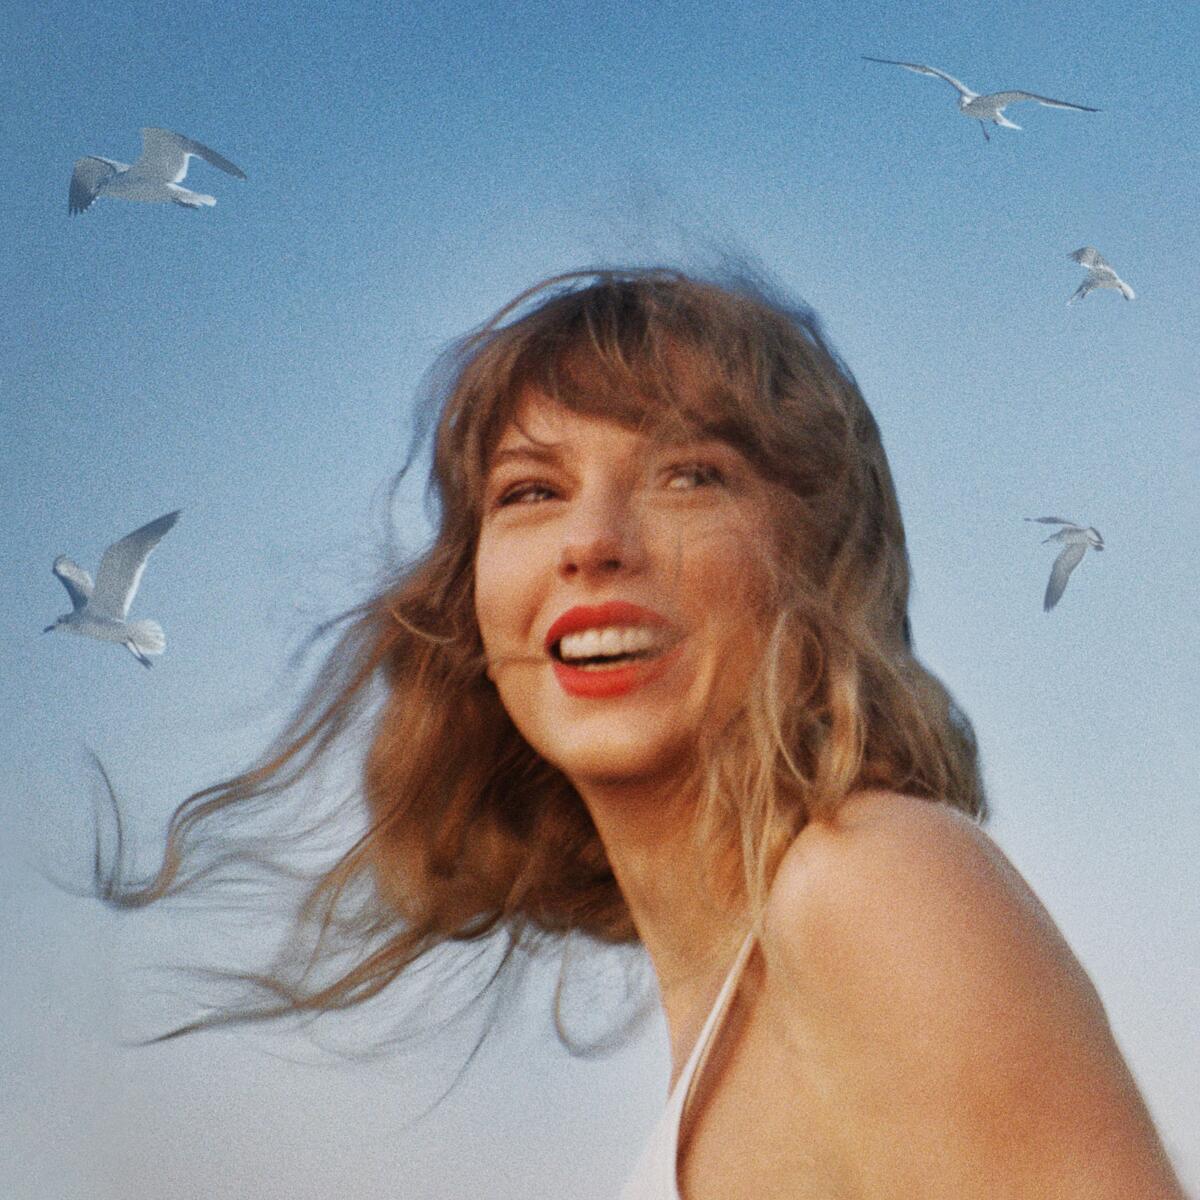 Taylor Swift turns her head and smiles as her hair blows in the wind. Seagulls fly overhead.